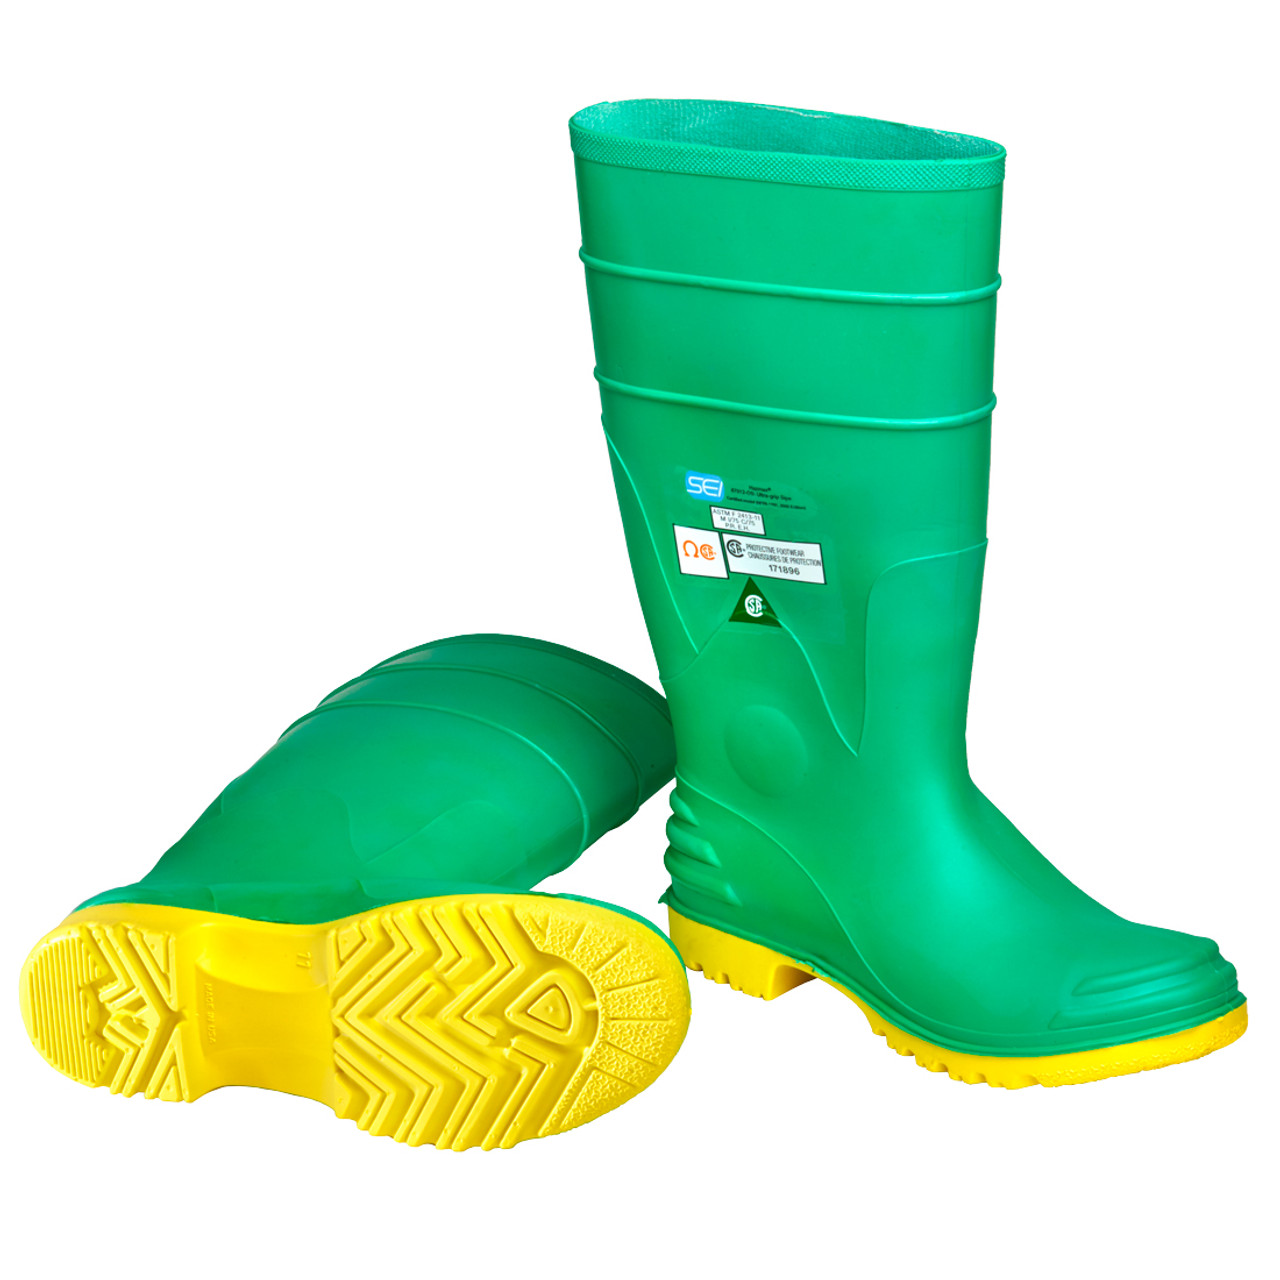 chemical resistant boots